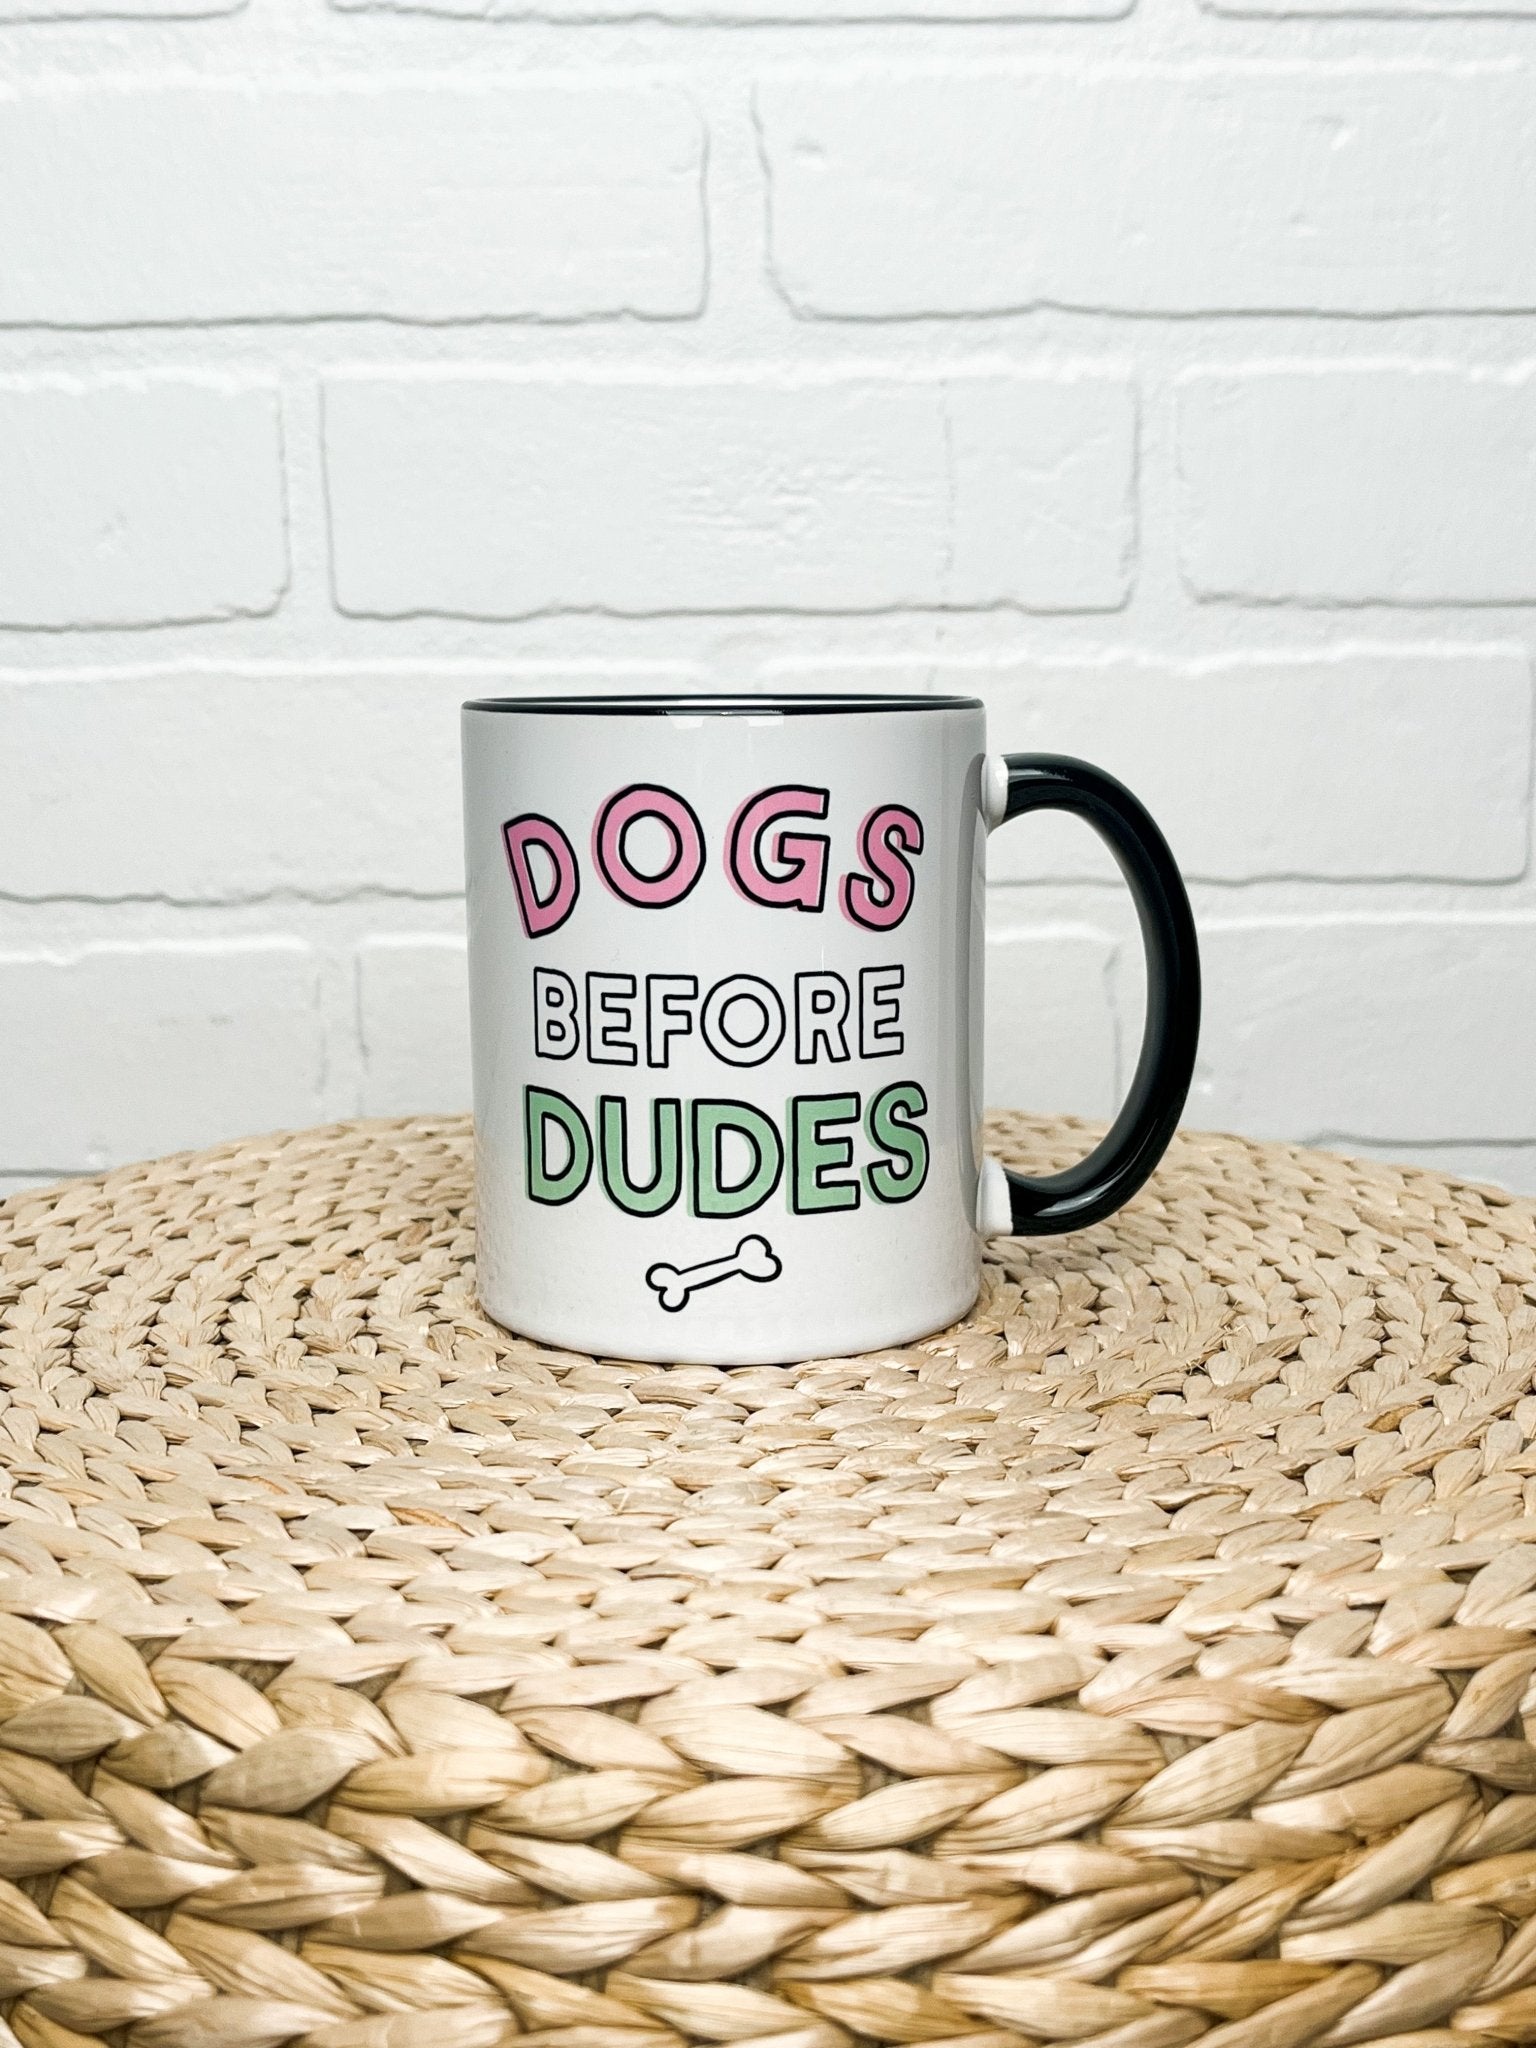 Mugsby Dogs before dudes coffee mug - Trendy Tumblers, Mugs and Cups at Lush Fashion Lounge Boutique in Oklahoma City